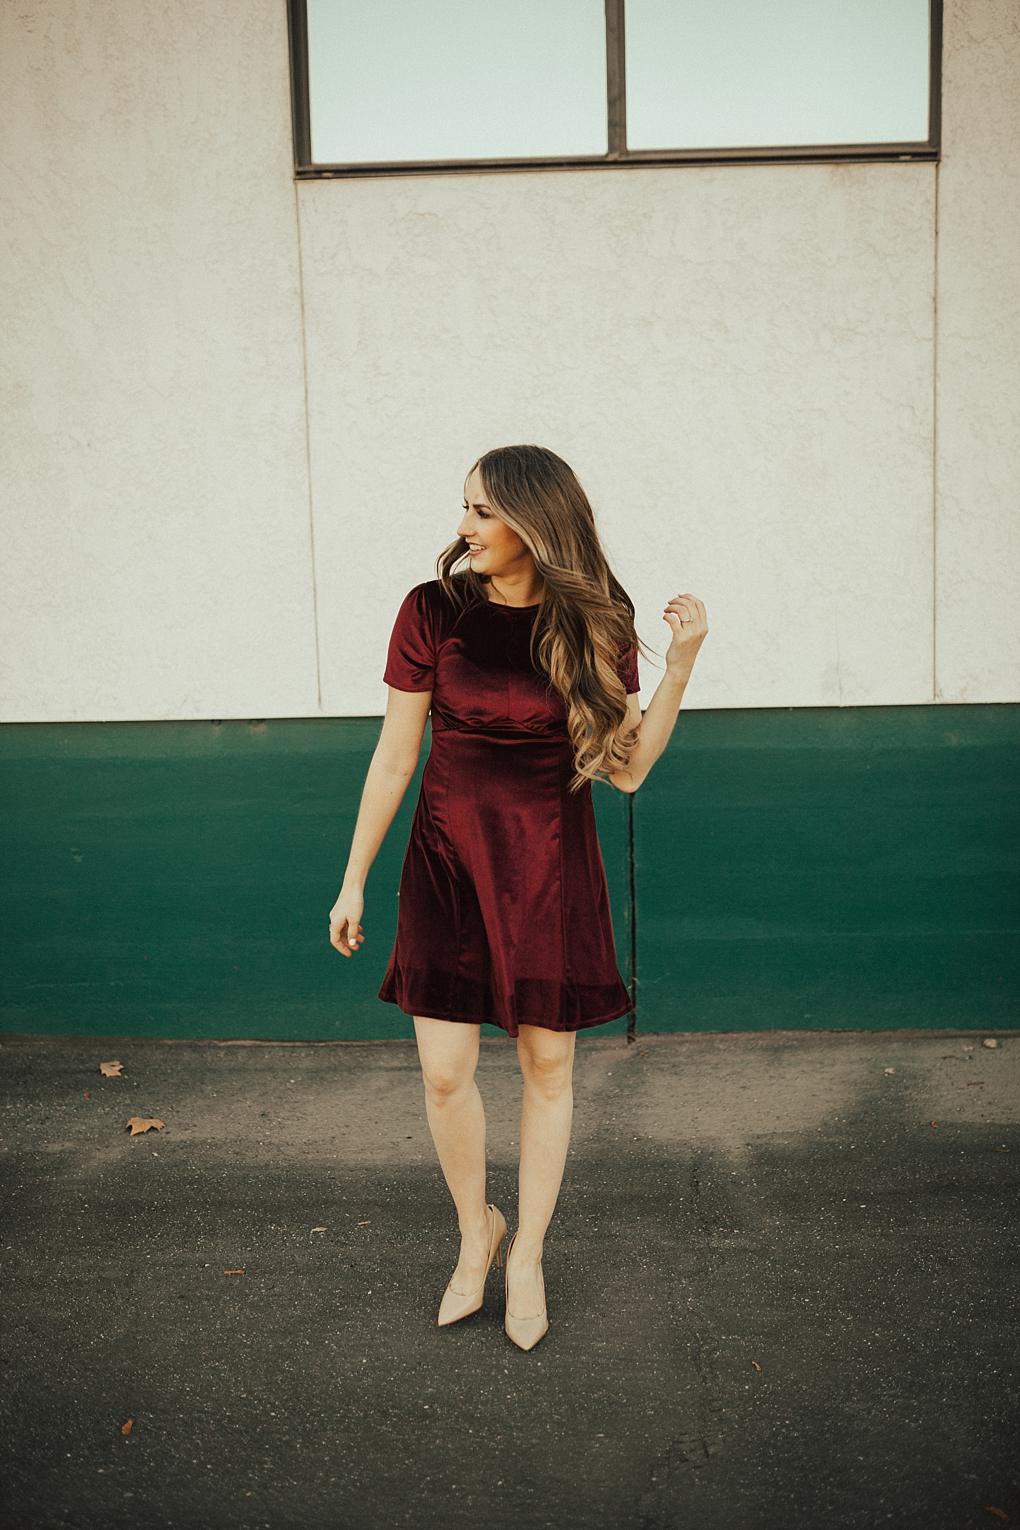 5 Church Outfits for Christmas Sunday by Utah fashion blogger Dani Marie